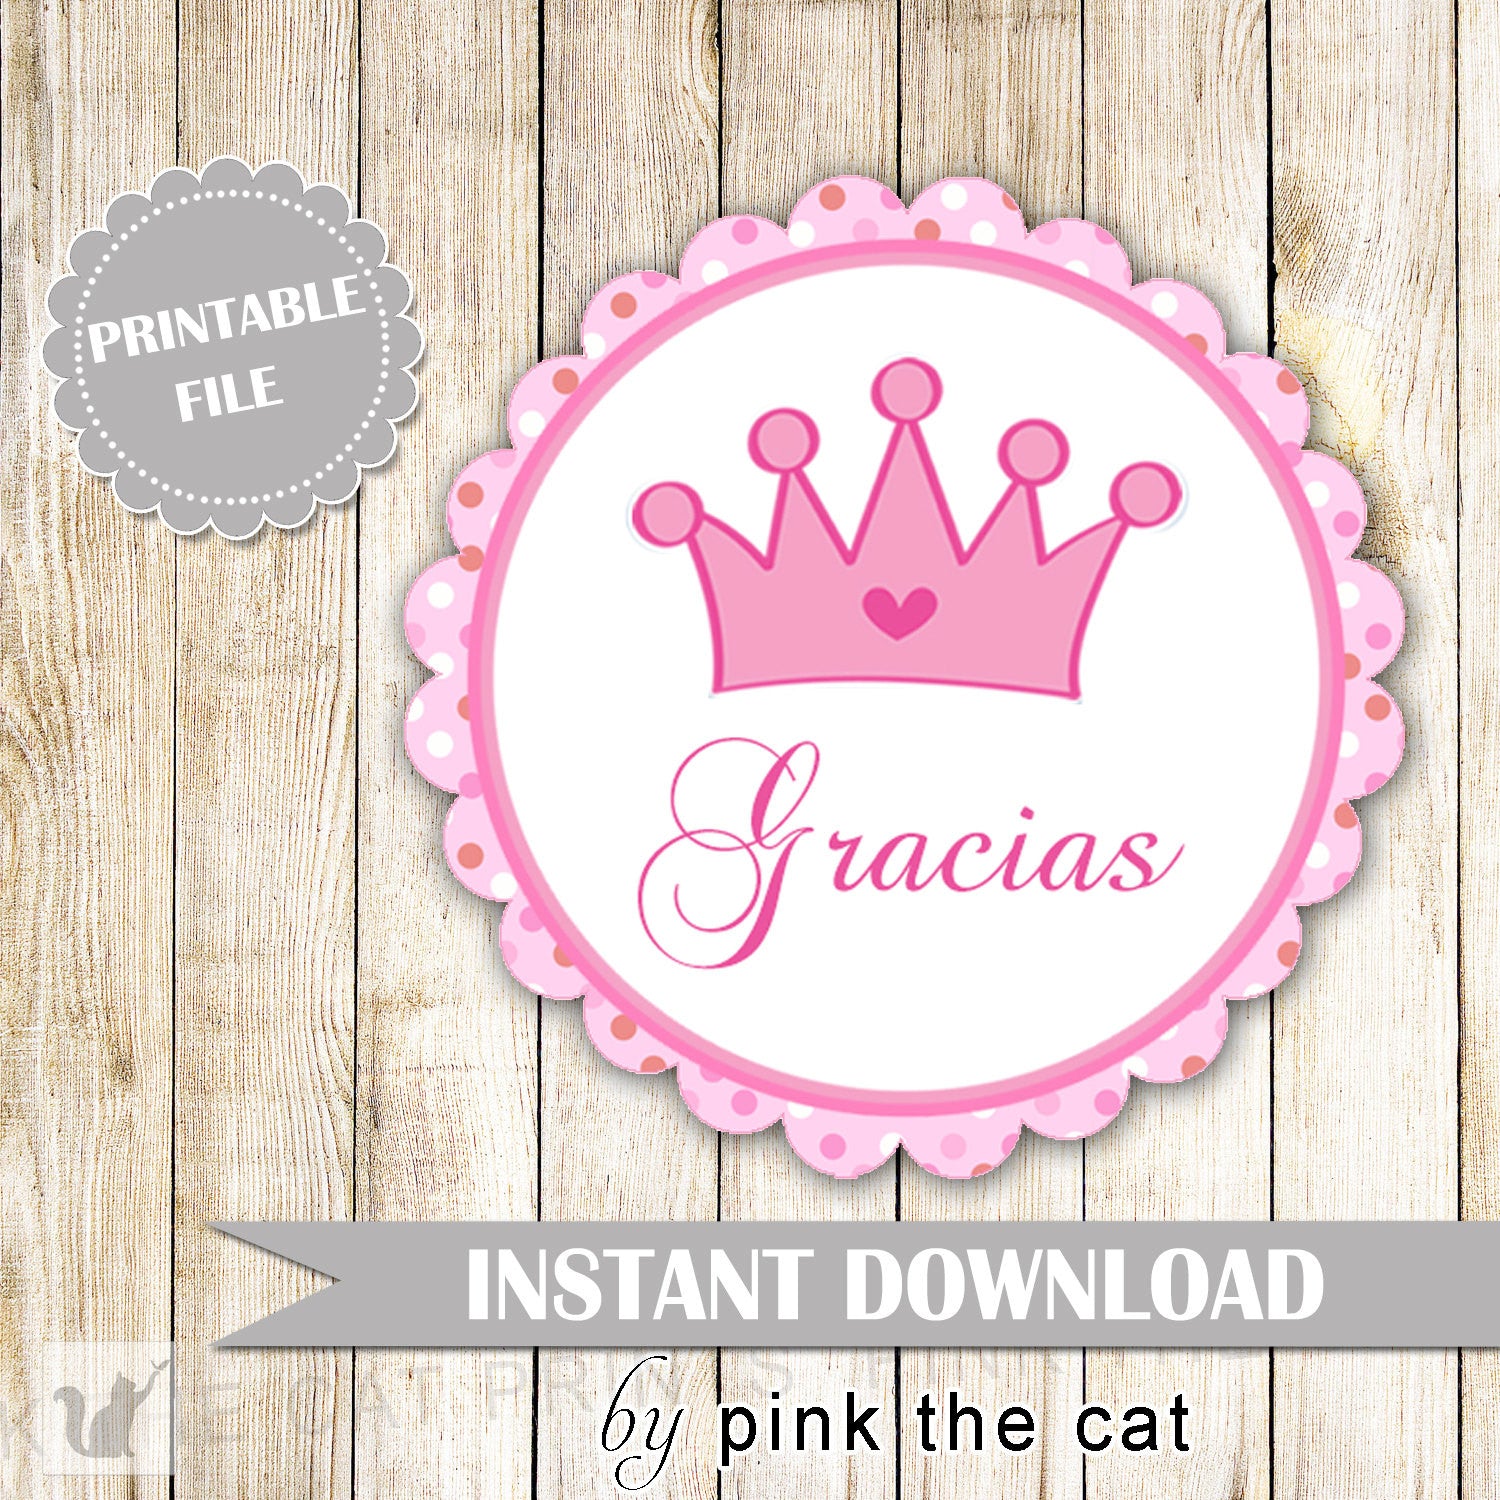 Princess Gift Favor Label or Tag - Pink Polka Dots Round Baby Shower Favors Birthday Party Favors Party Decorations Spanish INSTANT DOWNLOAD